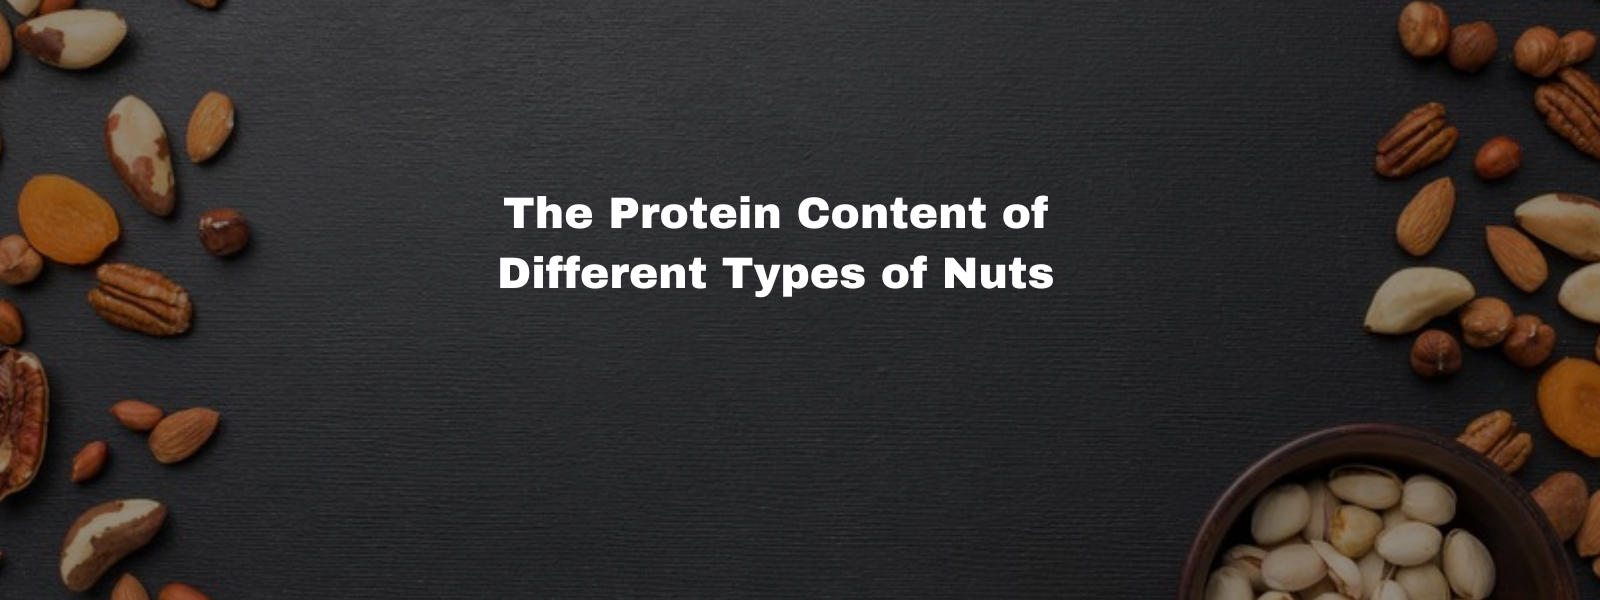 The Protein Content of Different Types of Nuts